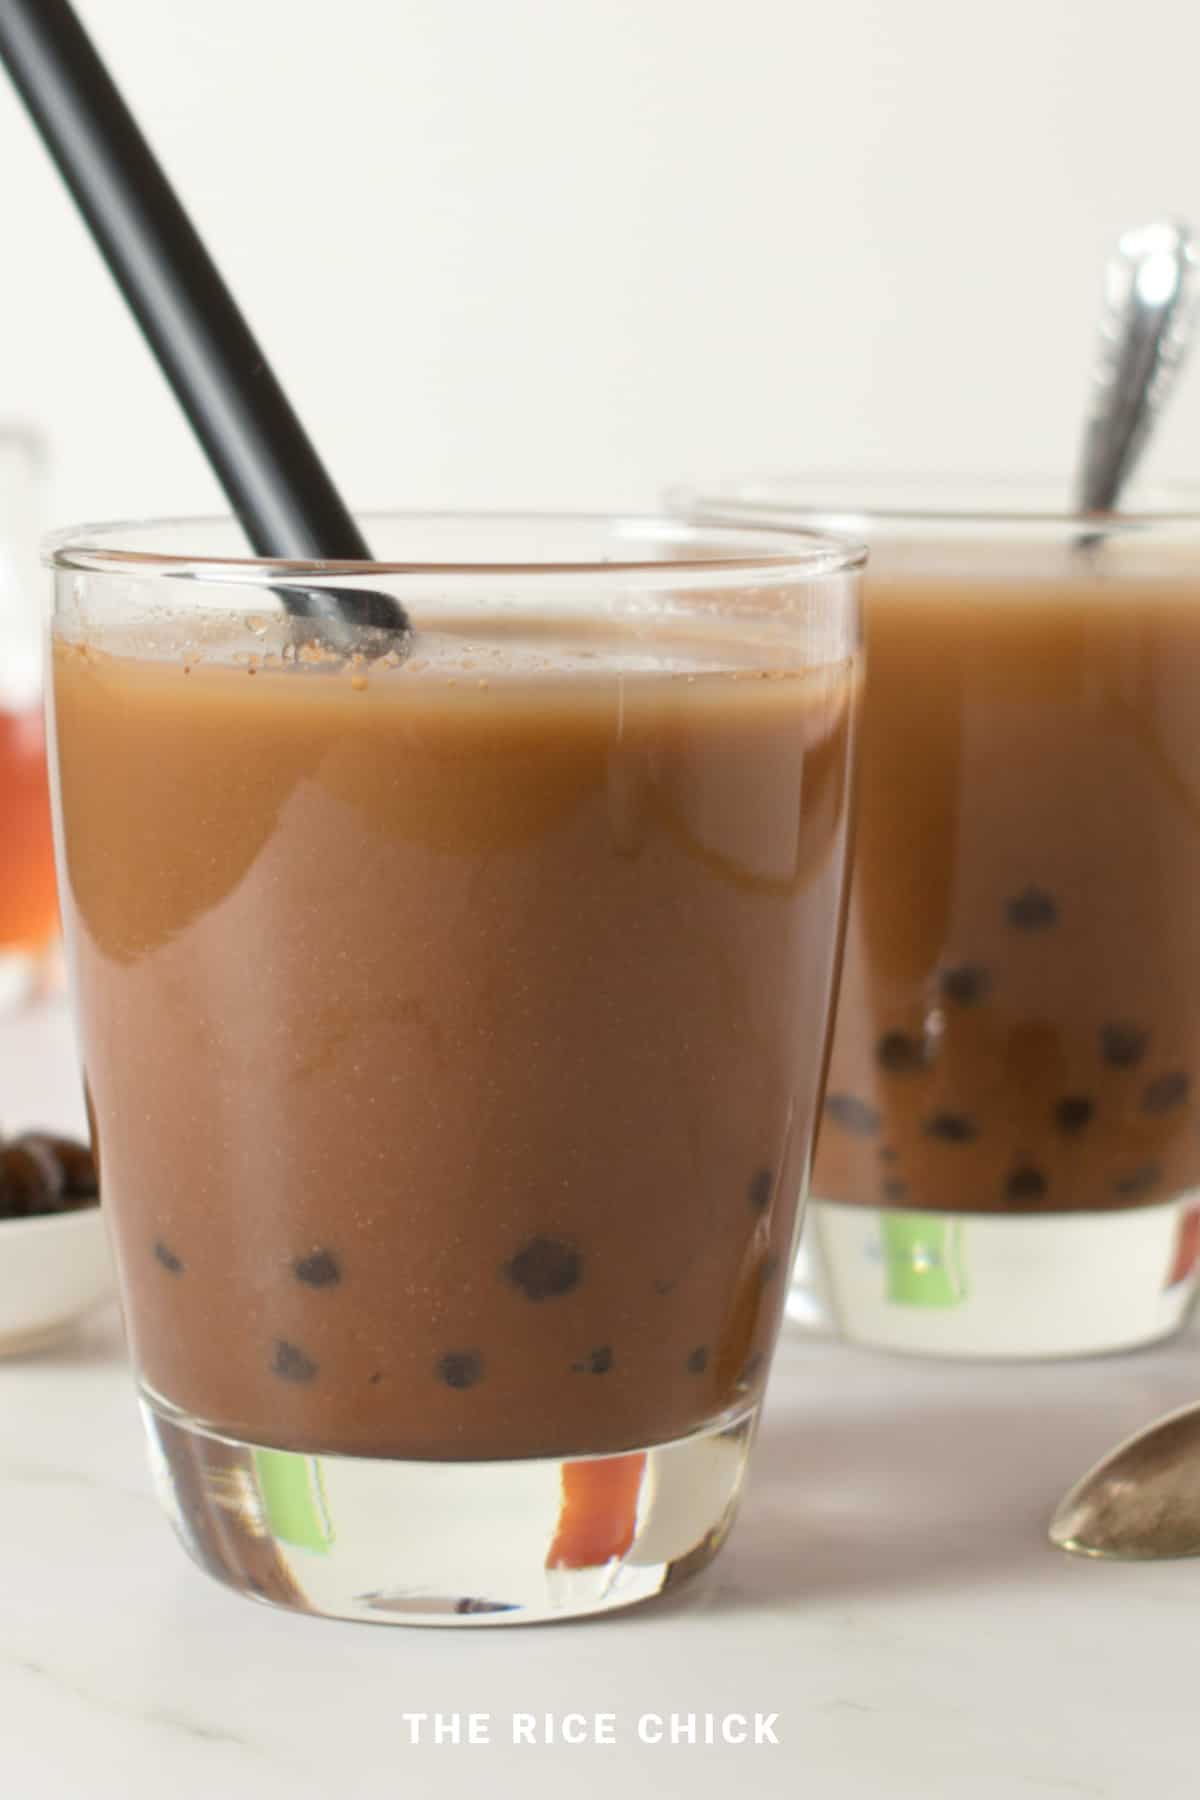 Chocolate boba in a glass with a straw.